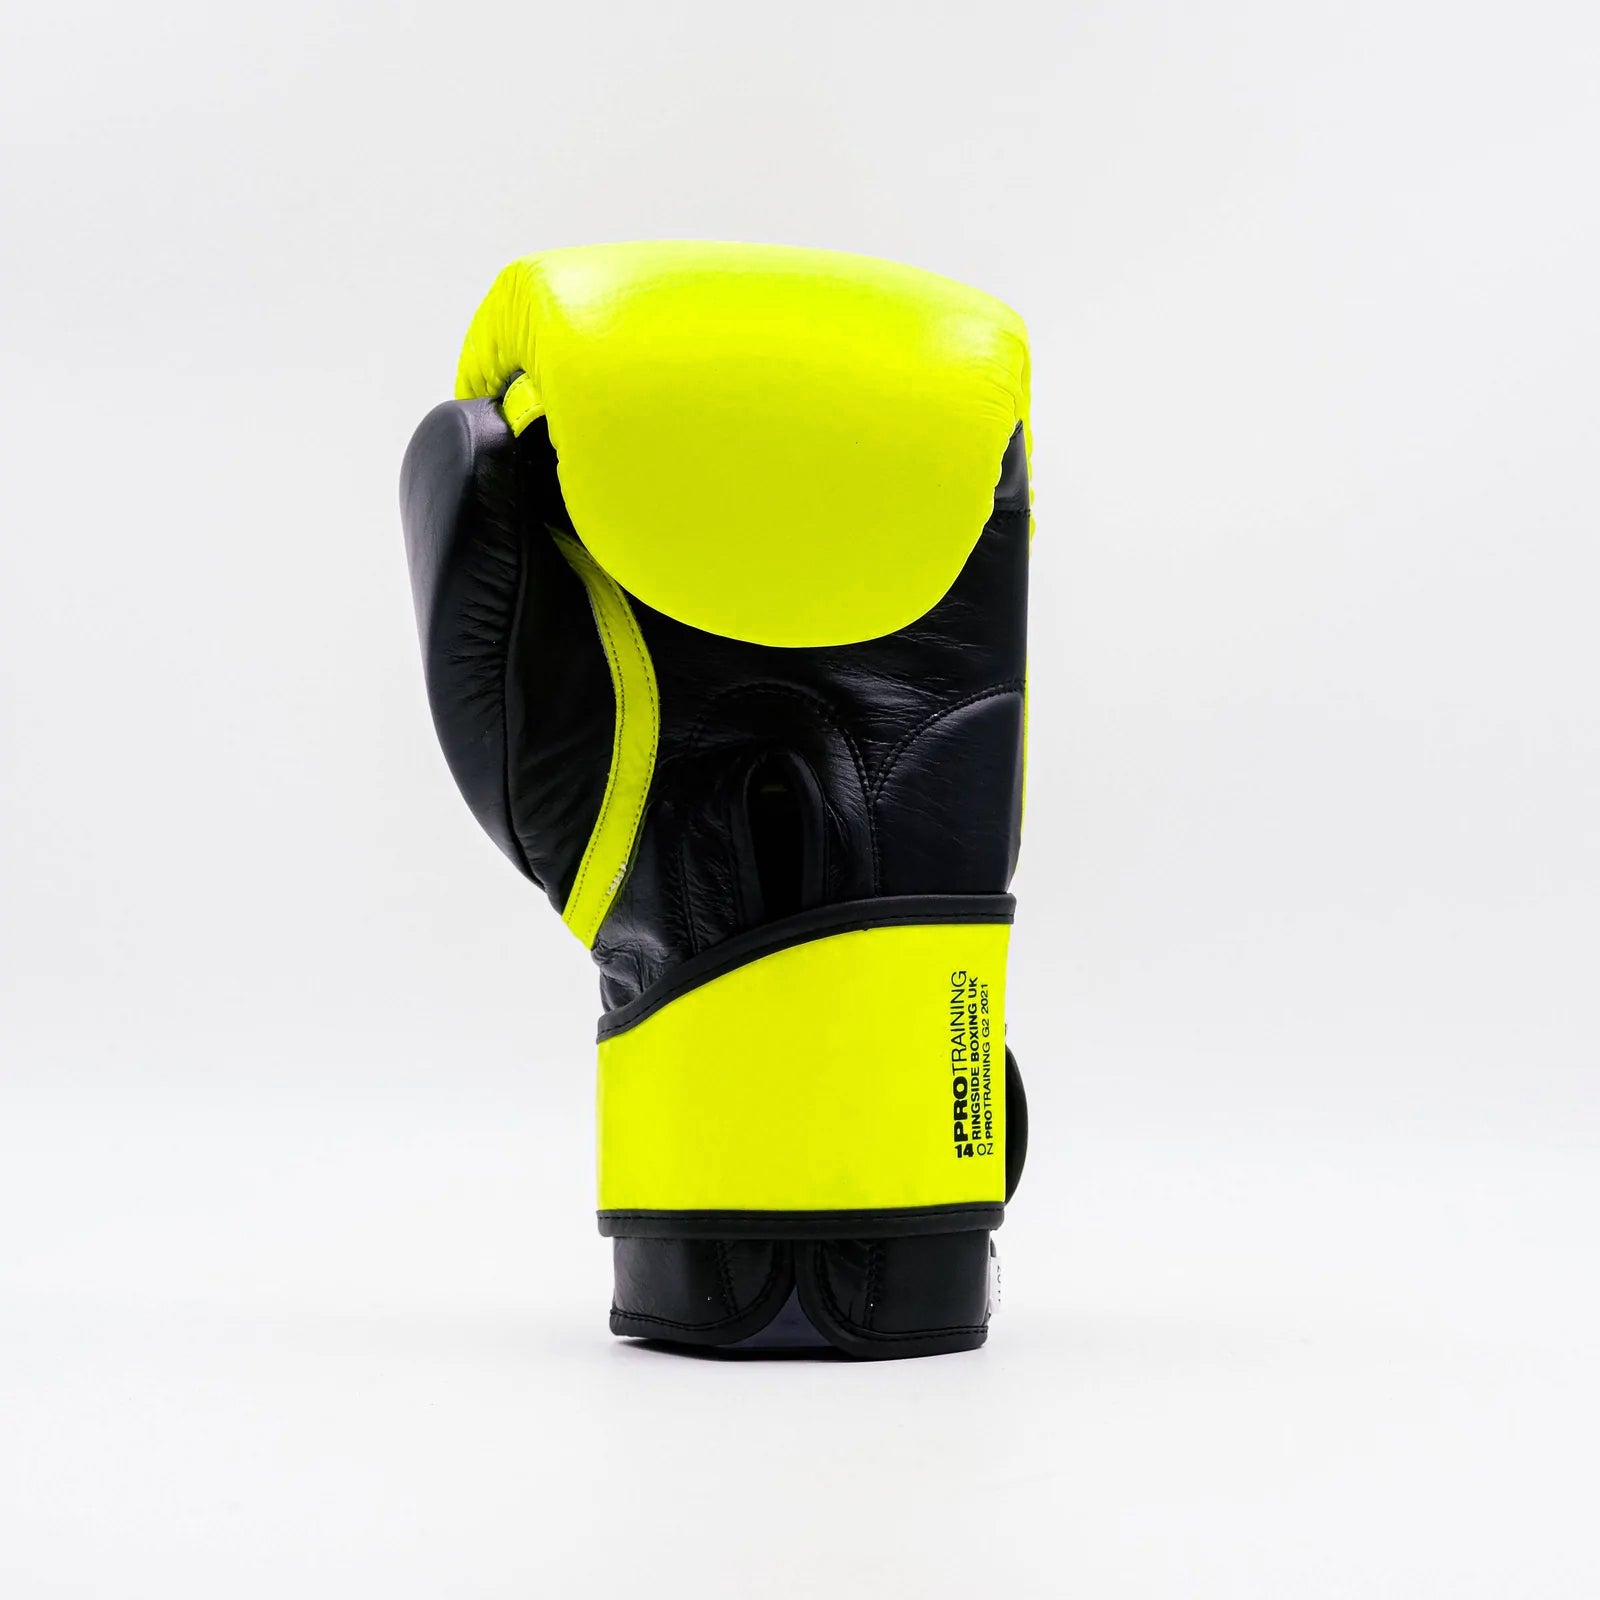 Ringside Strap Boxing Glove Yellow on white background reverse angle